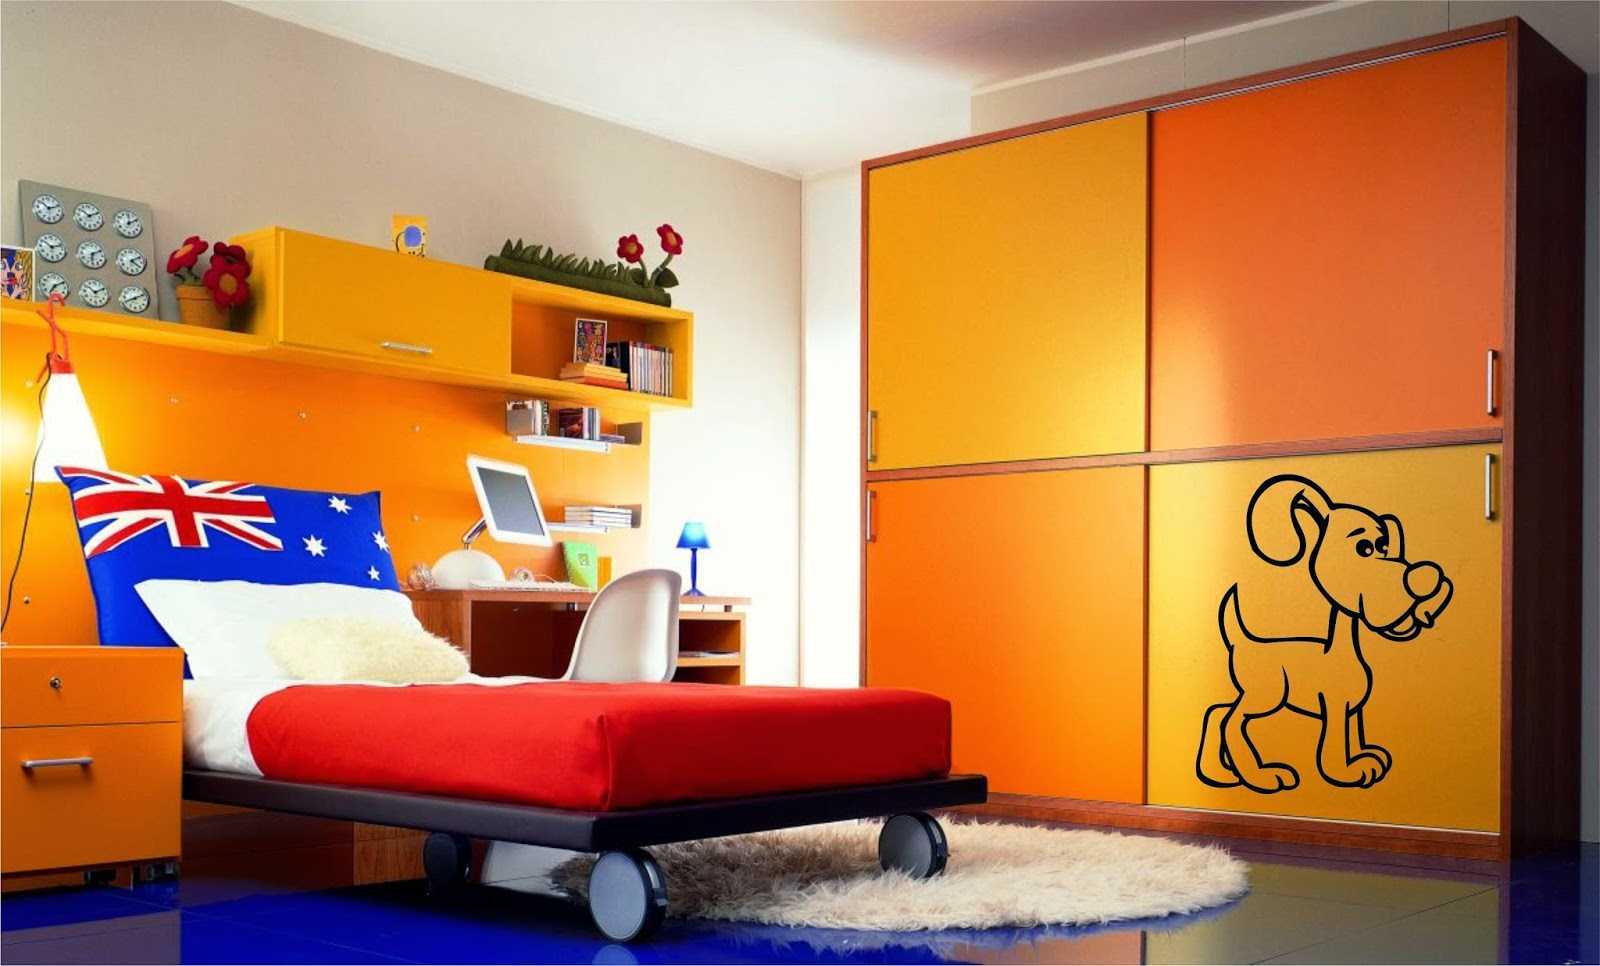 a combination of bright orange in the style of the apartment with other colors